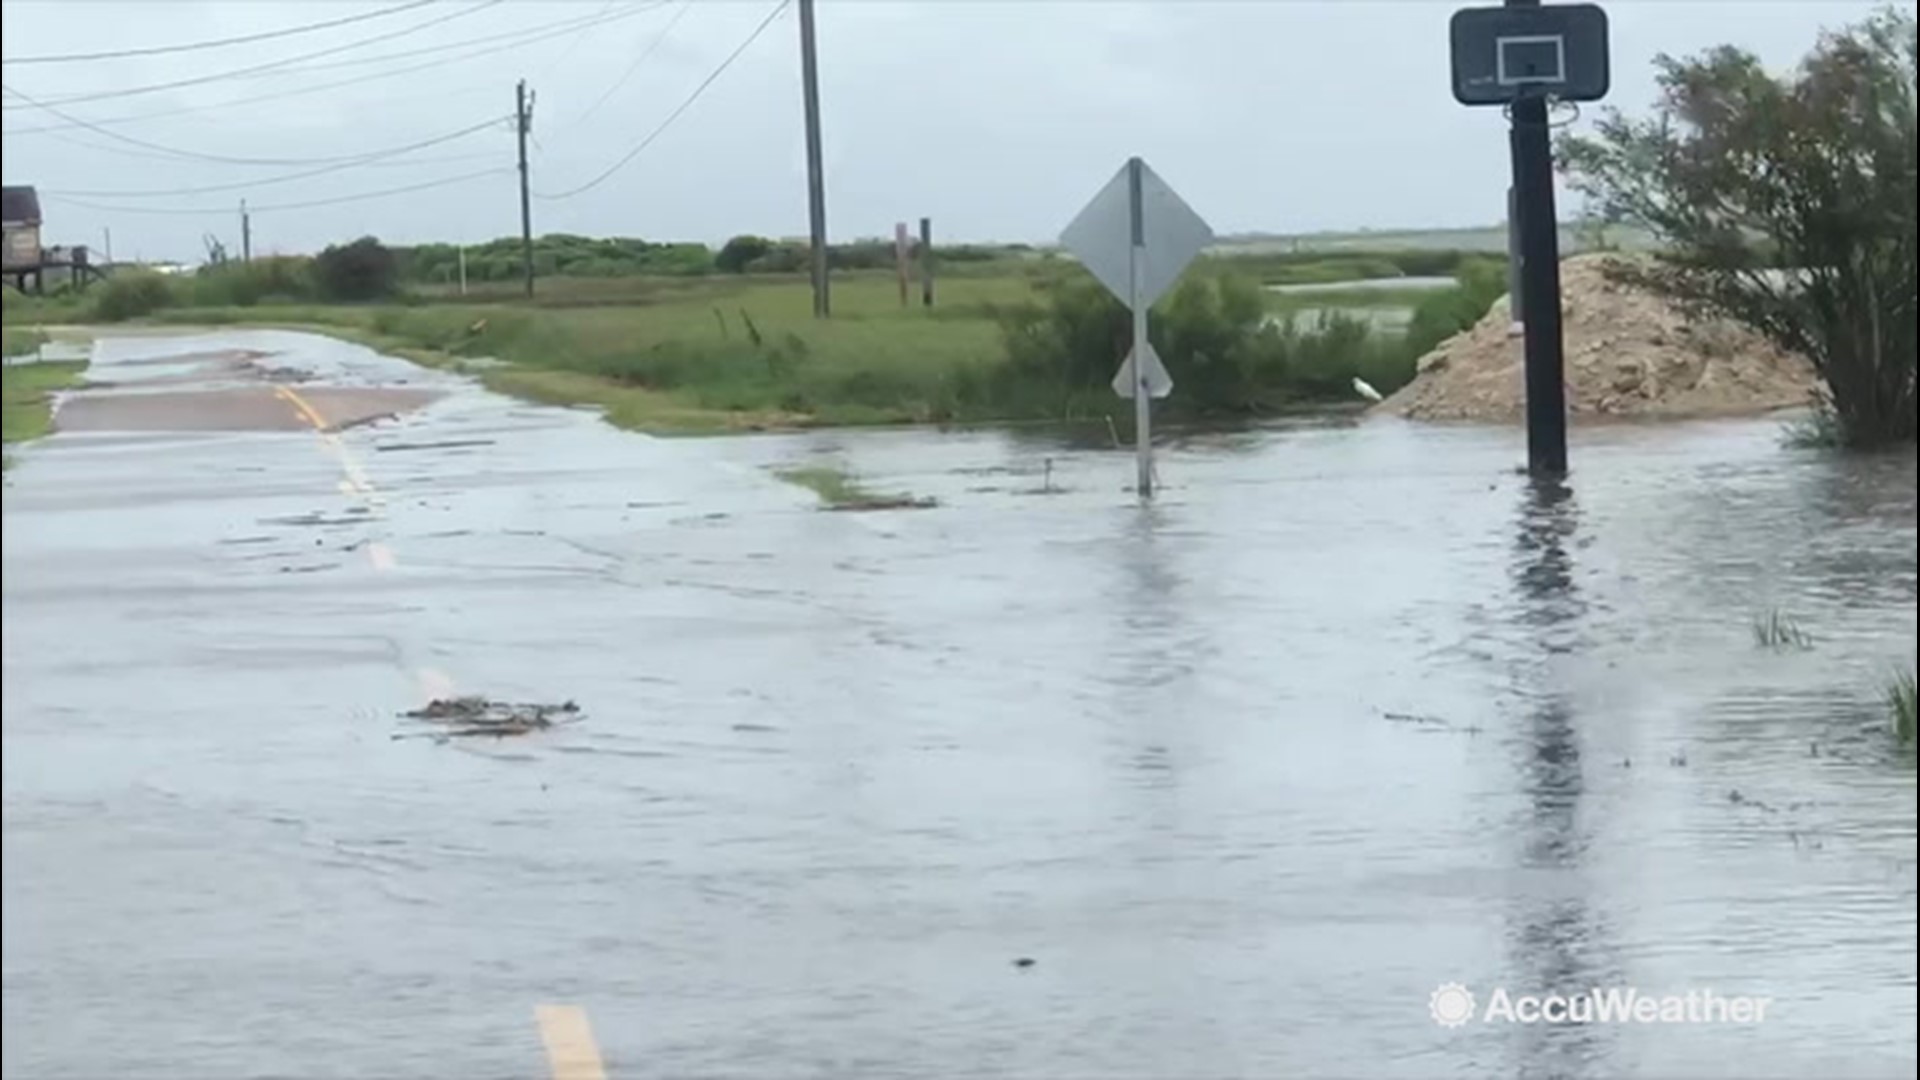 The town of Chauvin, Louisiana was hit hard by Tropical Storm Barry, on July 12. Though the storm had yet to fully hit, the storm surge that was kicked up while the it was still in the Gulf of Mexico pushed water over the coast and into roads.